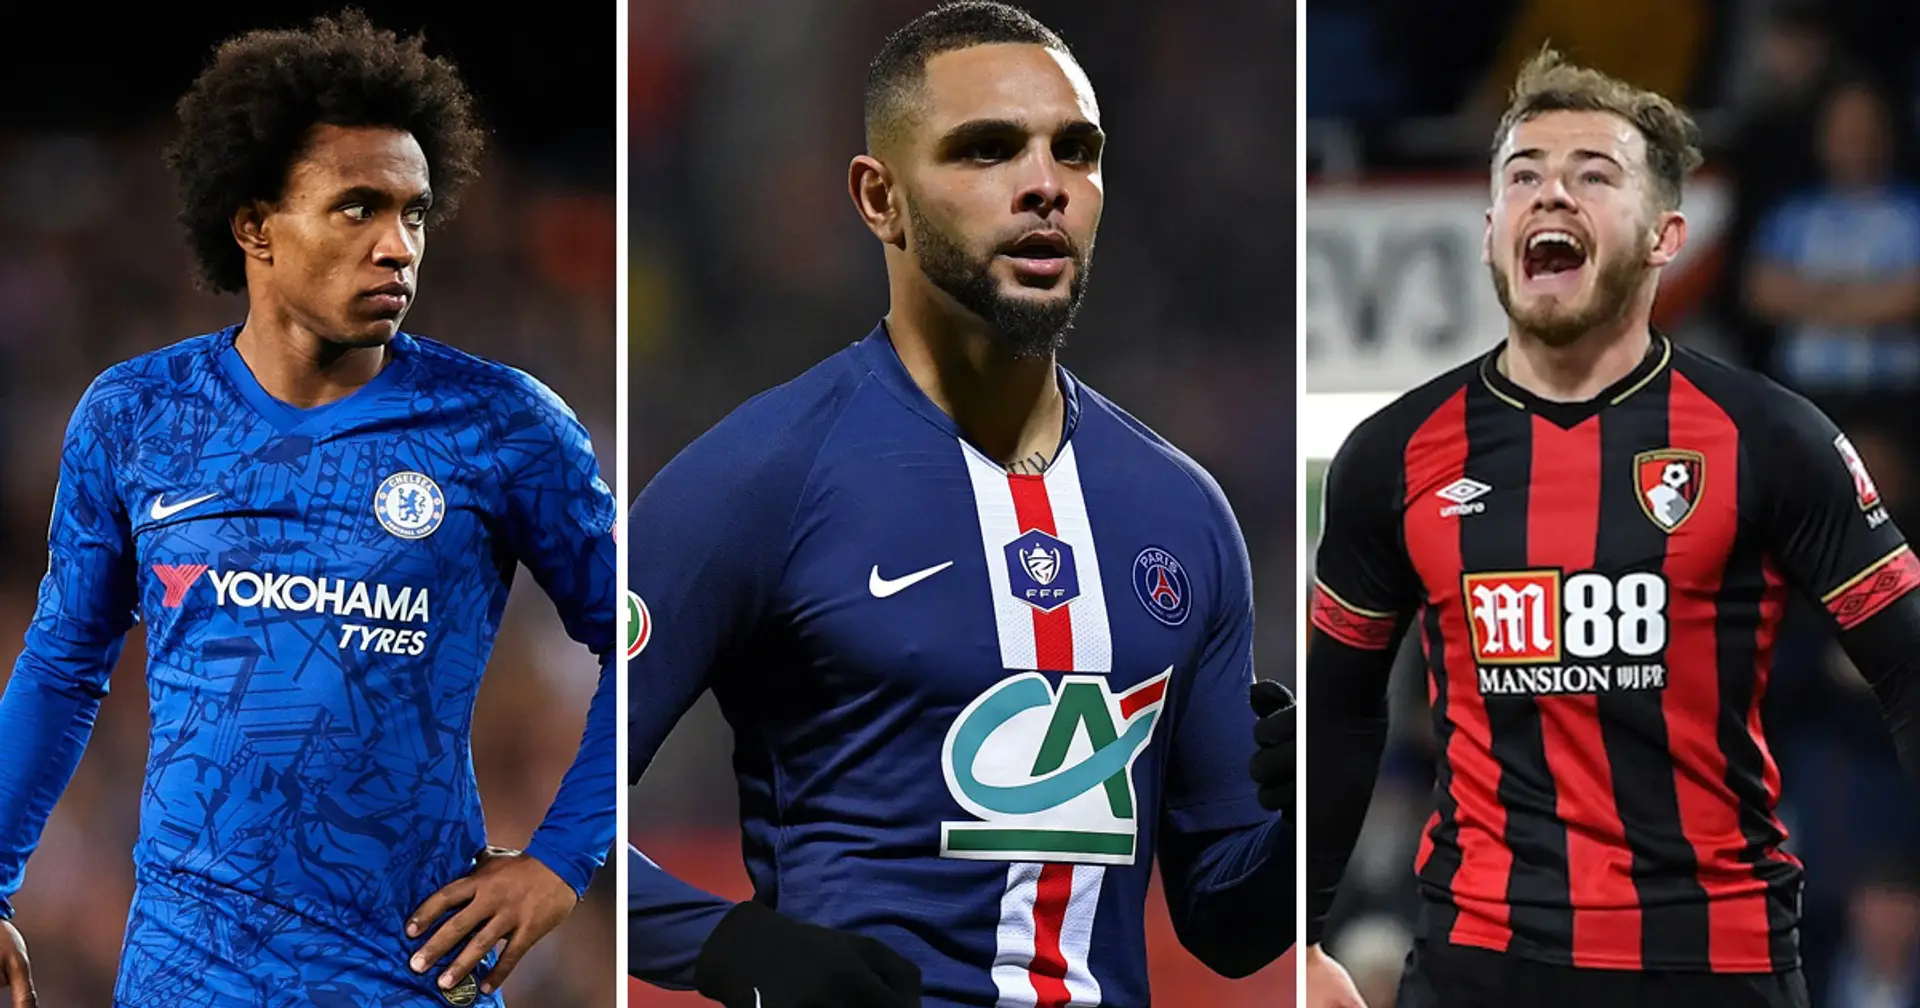 Arsenal reportedly keeping tabs on Willian, Fraser and Kurzawa, all of whom are out of contract this summer